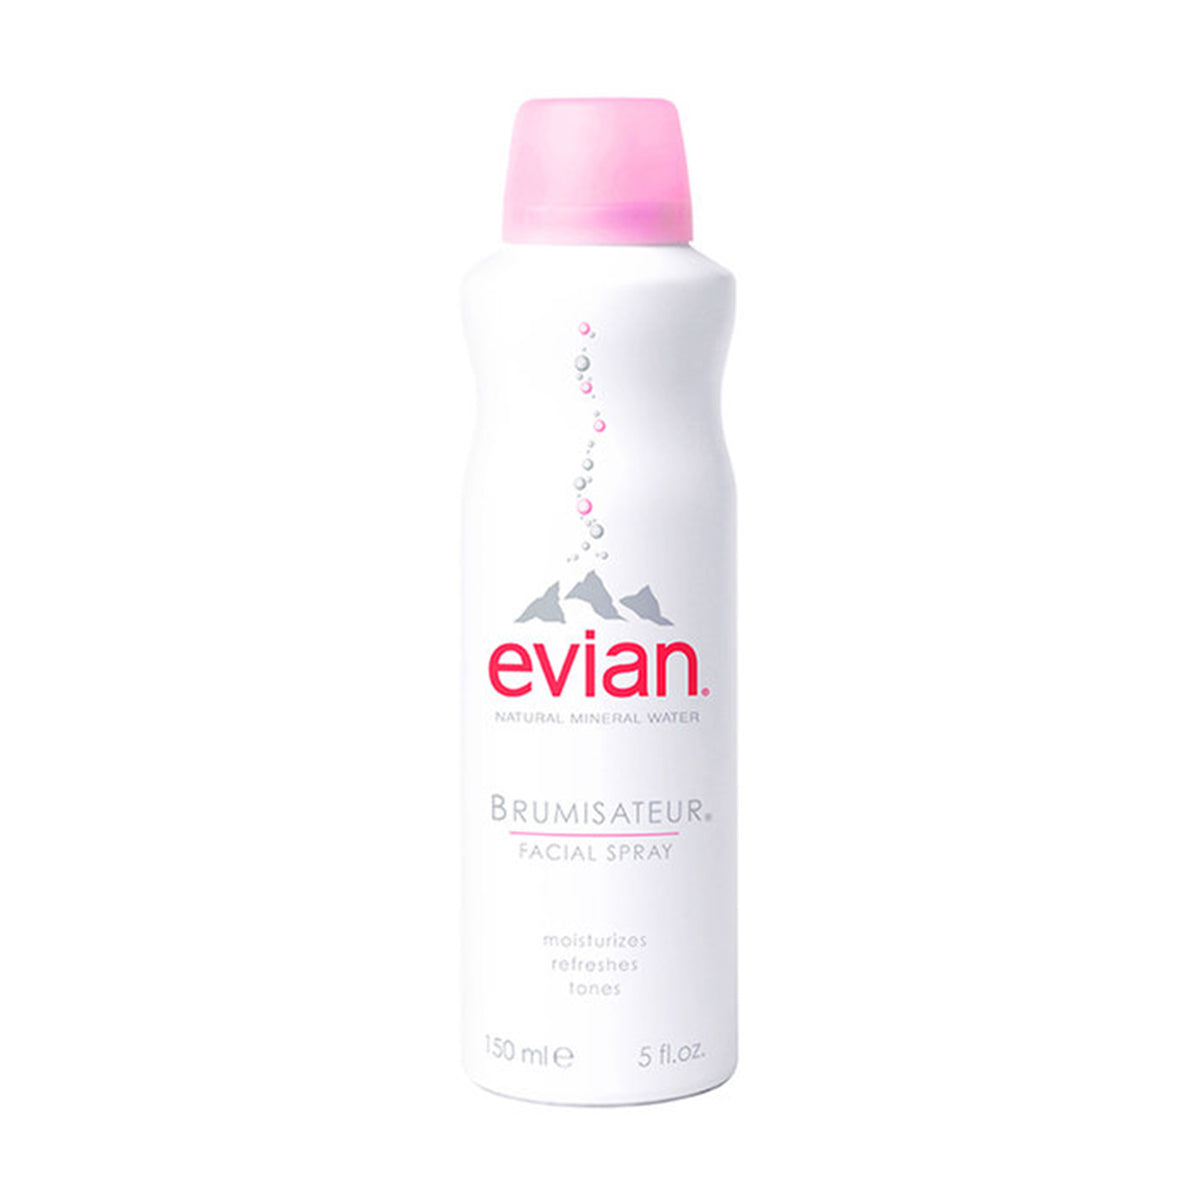 Primary image of Evian Mineral Spray